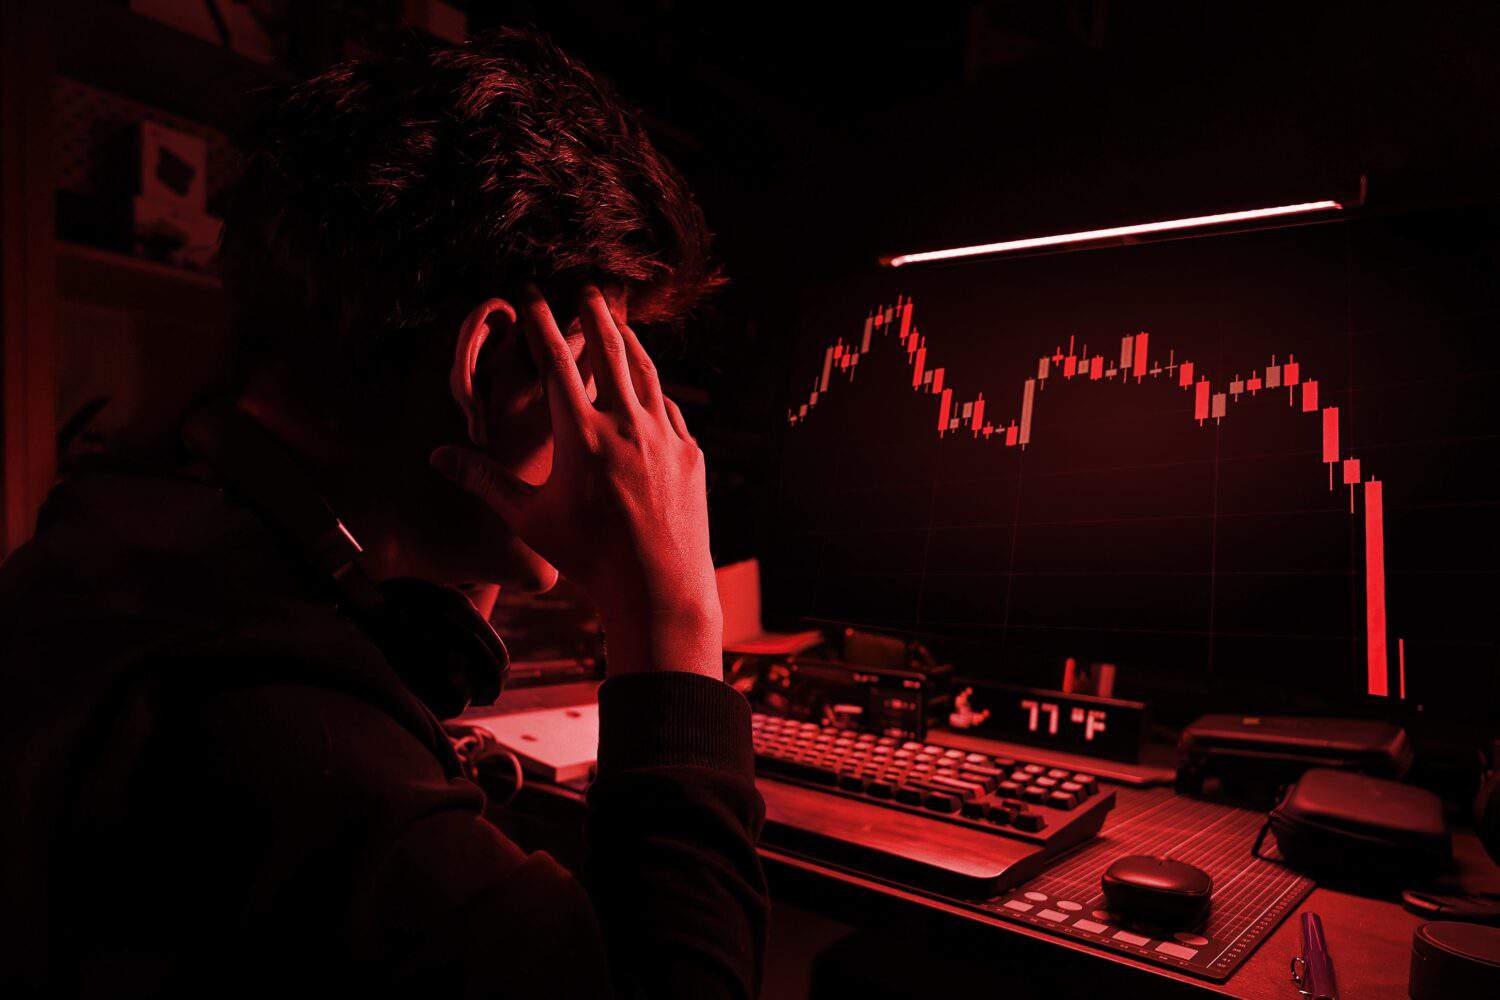 Stress Business man look at the Computer Screen, The red crashing market volatility of crypto trading with technical graph and indicator, red candlesticks going down without resistance, market crash,